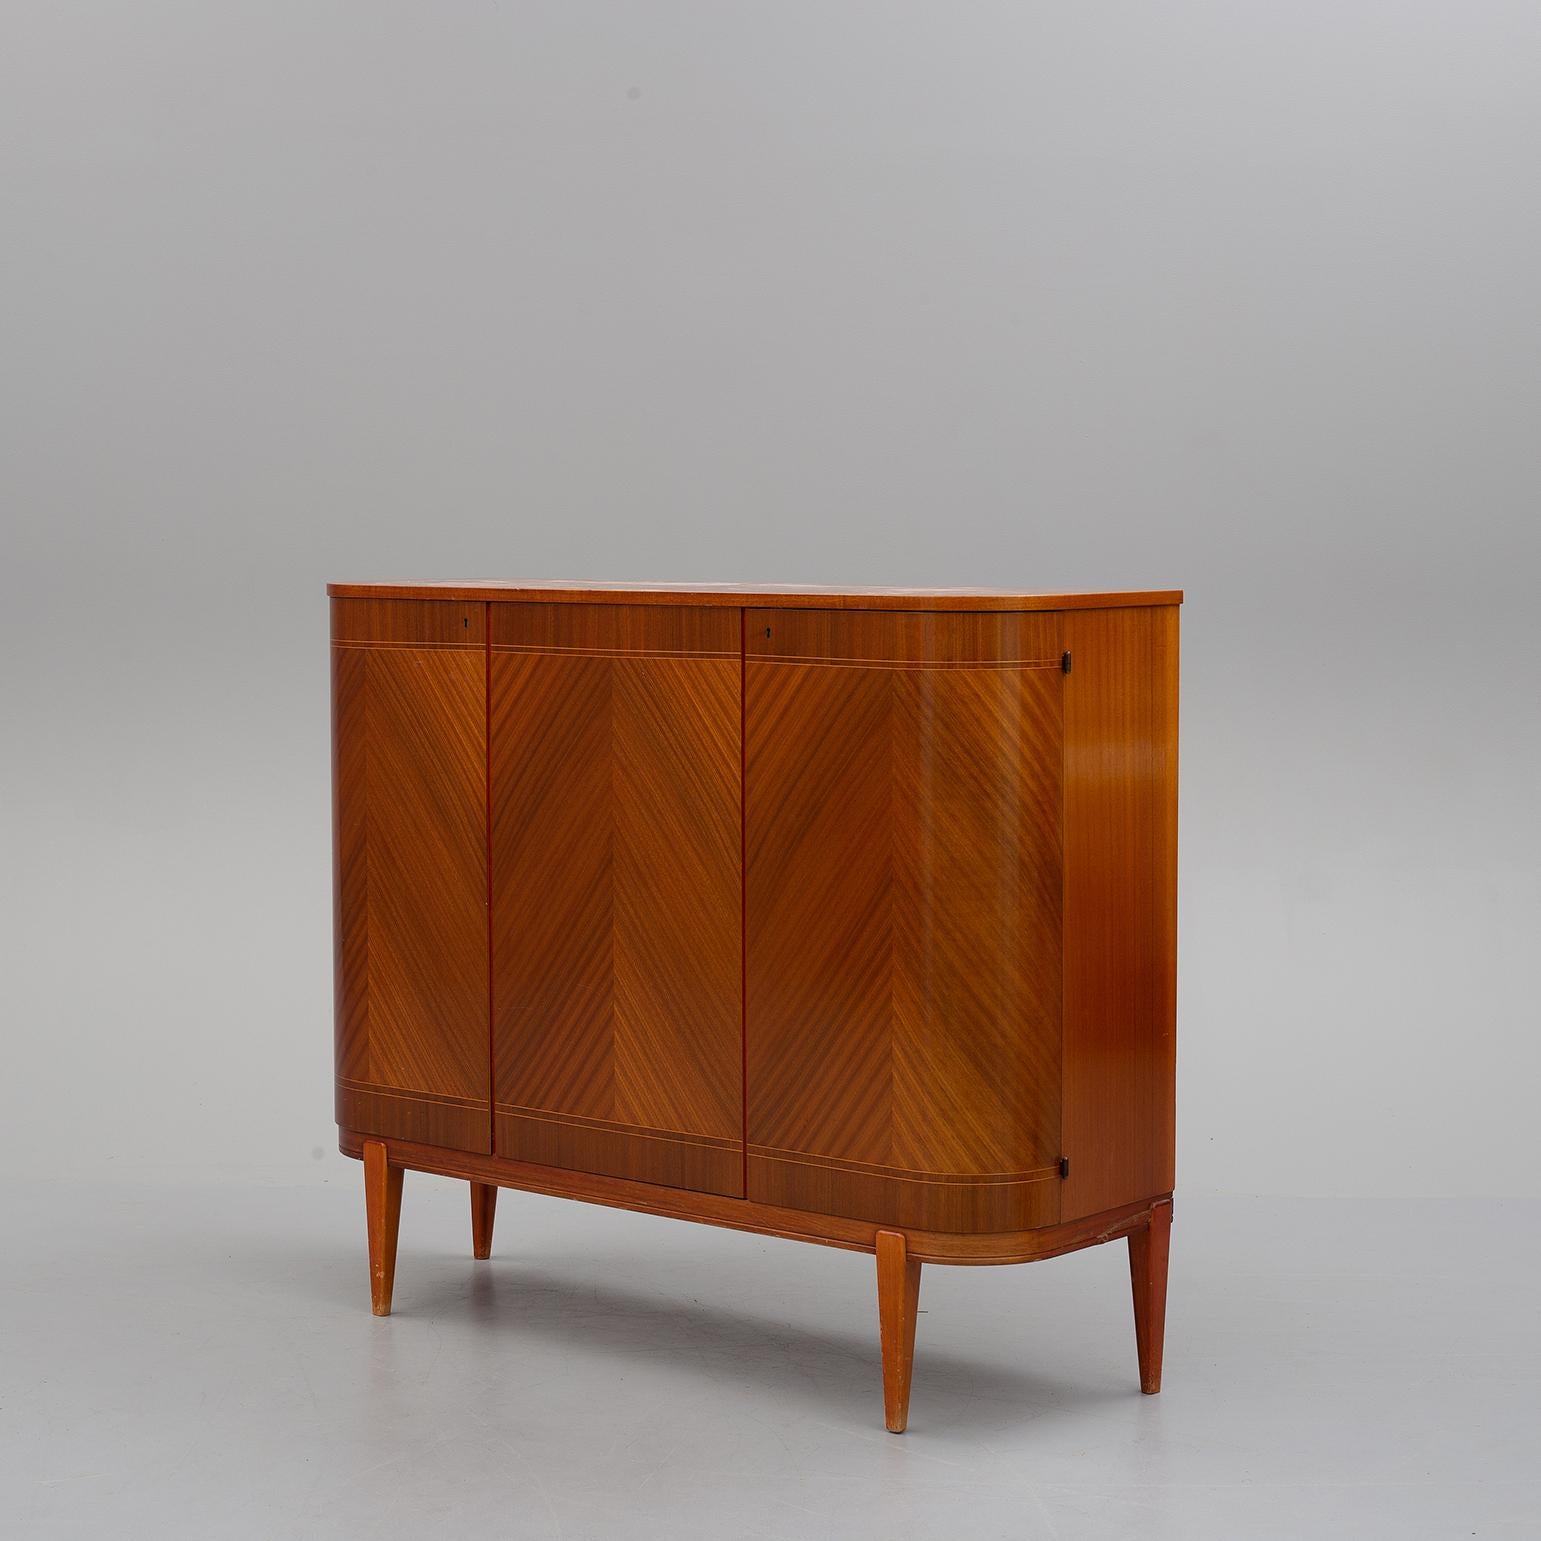 A three-door mahogany sideboard, the veneer forming a superb chevron pattern, internally fitted with adjustable shelves and drawers, with curved doors and sides, on tapered legs, with brass bullet hinges, brass locks and original key in working